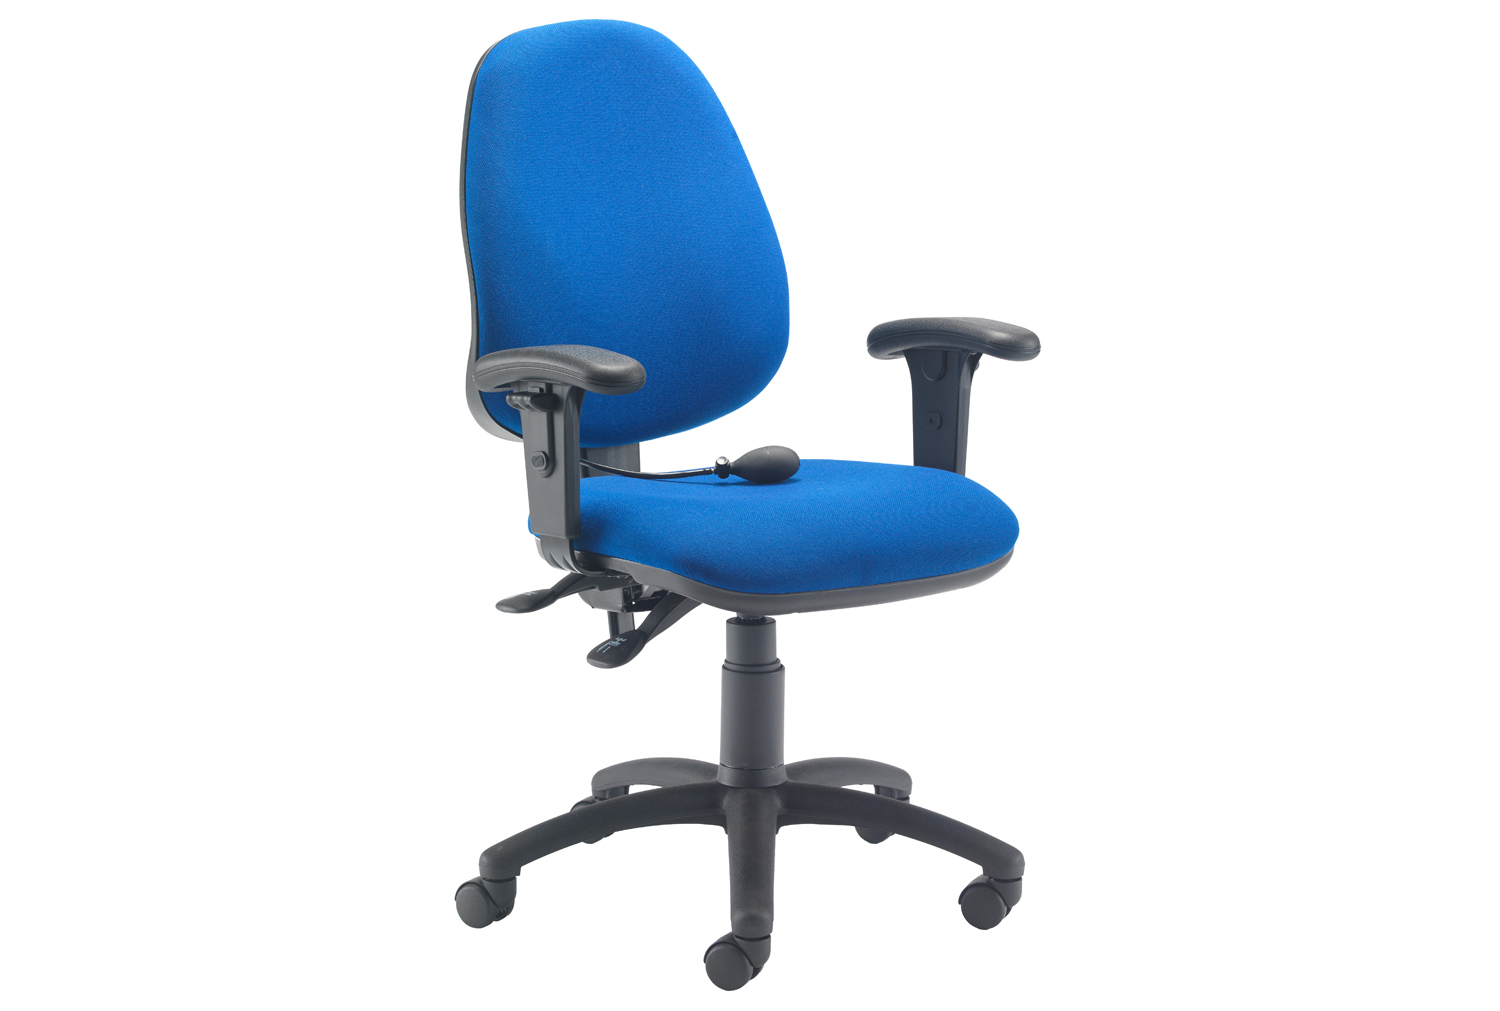 Orchid Lumbar Pump Ergonomic Operator Office Chair With Height Adjustable Arms, Blue, Express Delivery